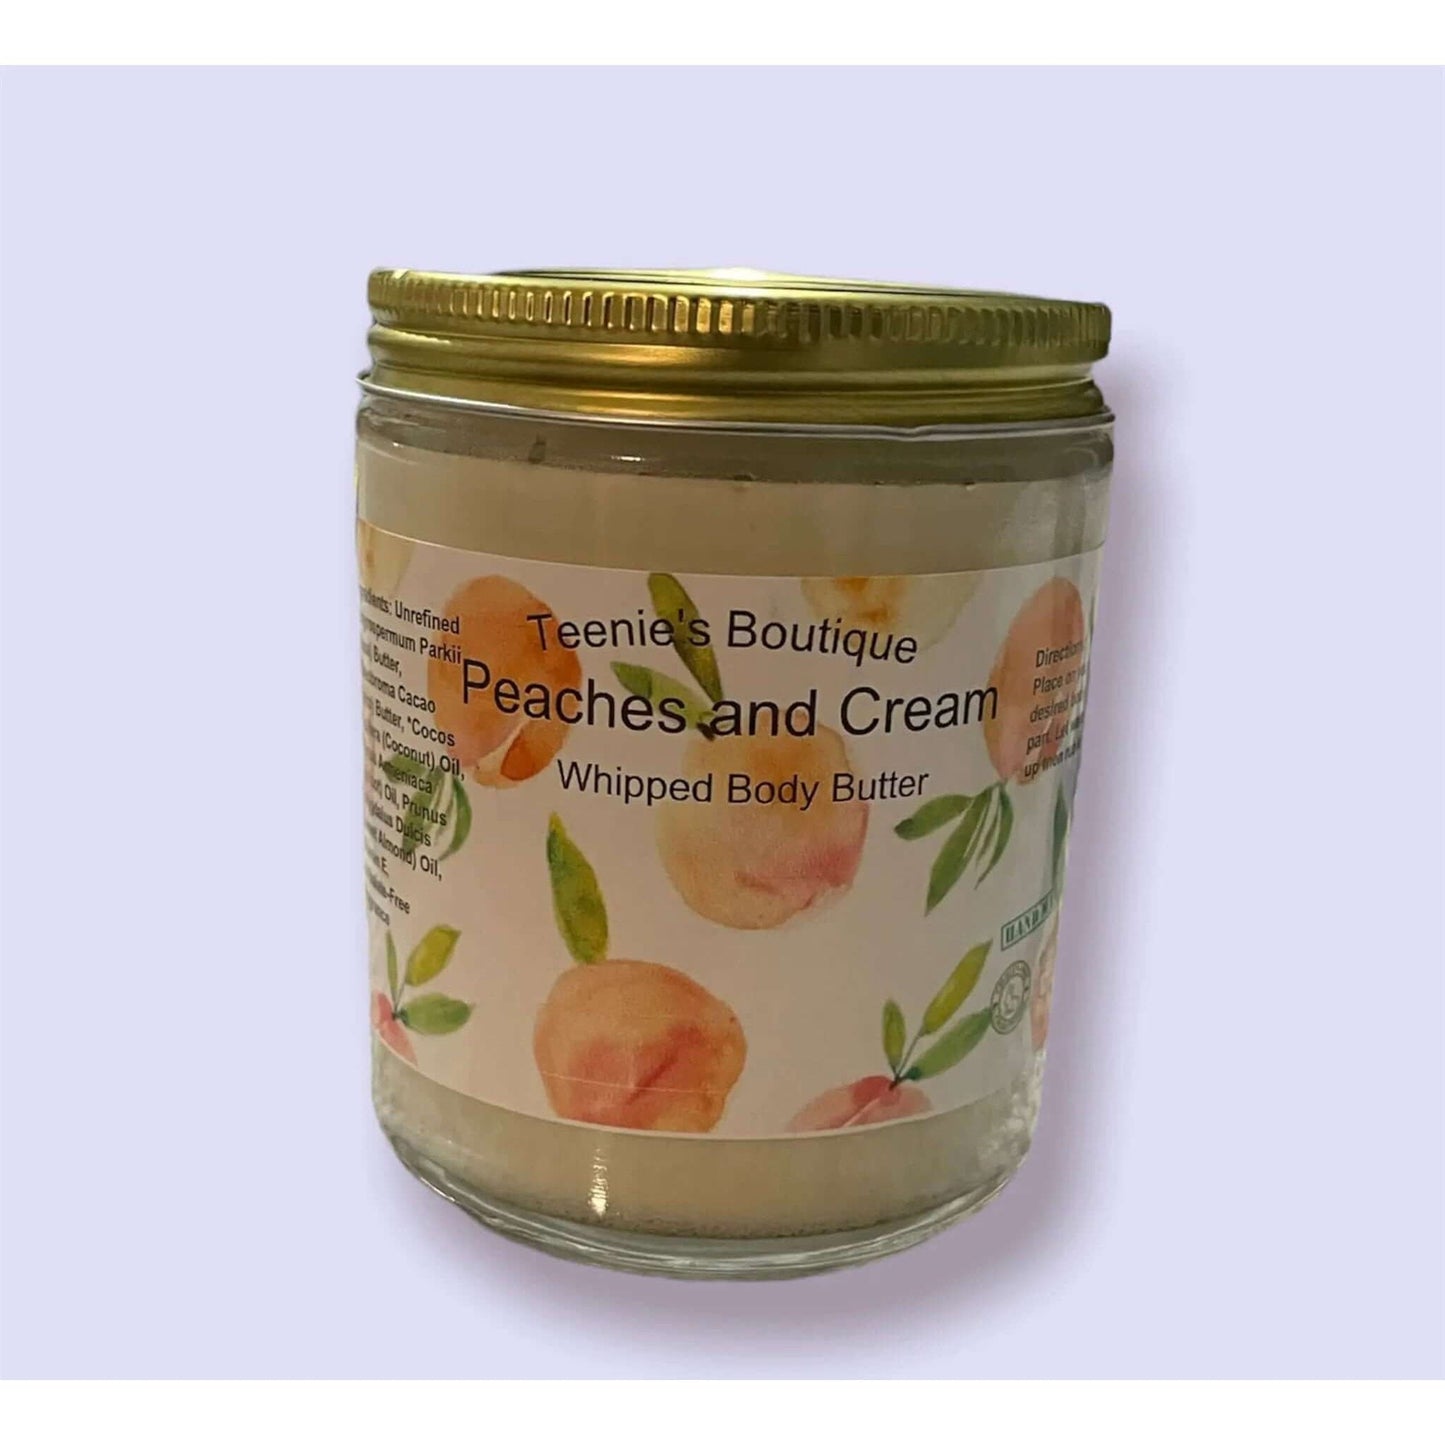 Luxurious Body Butter - Teenies Boutique Peaches and Cream Body Butter